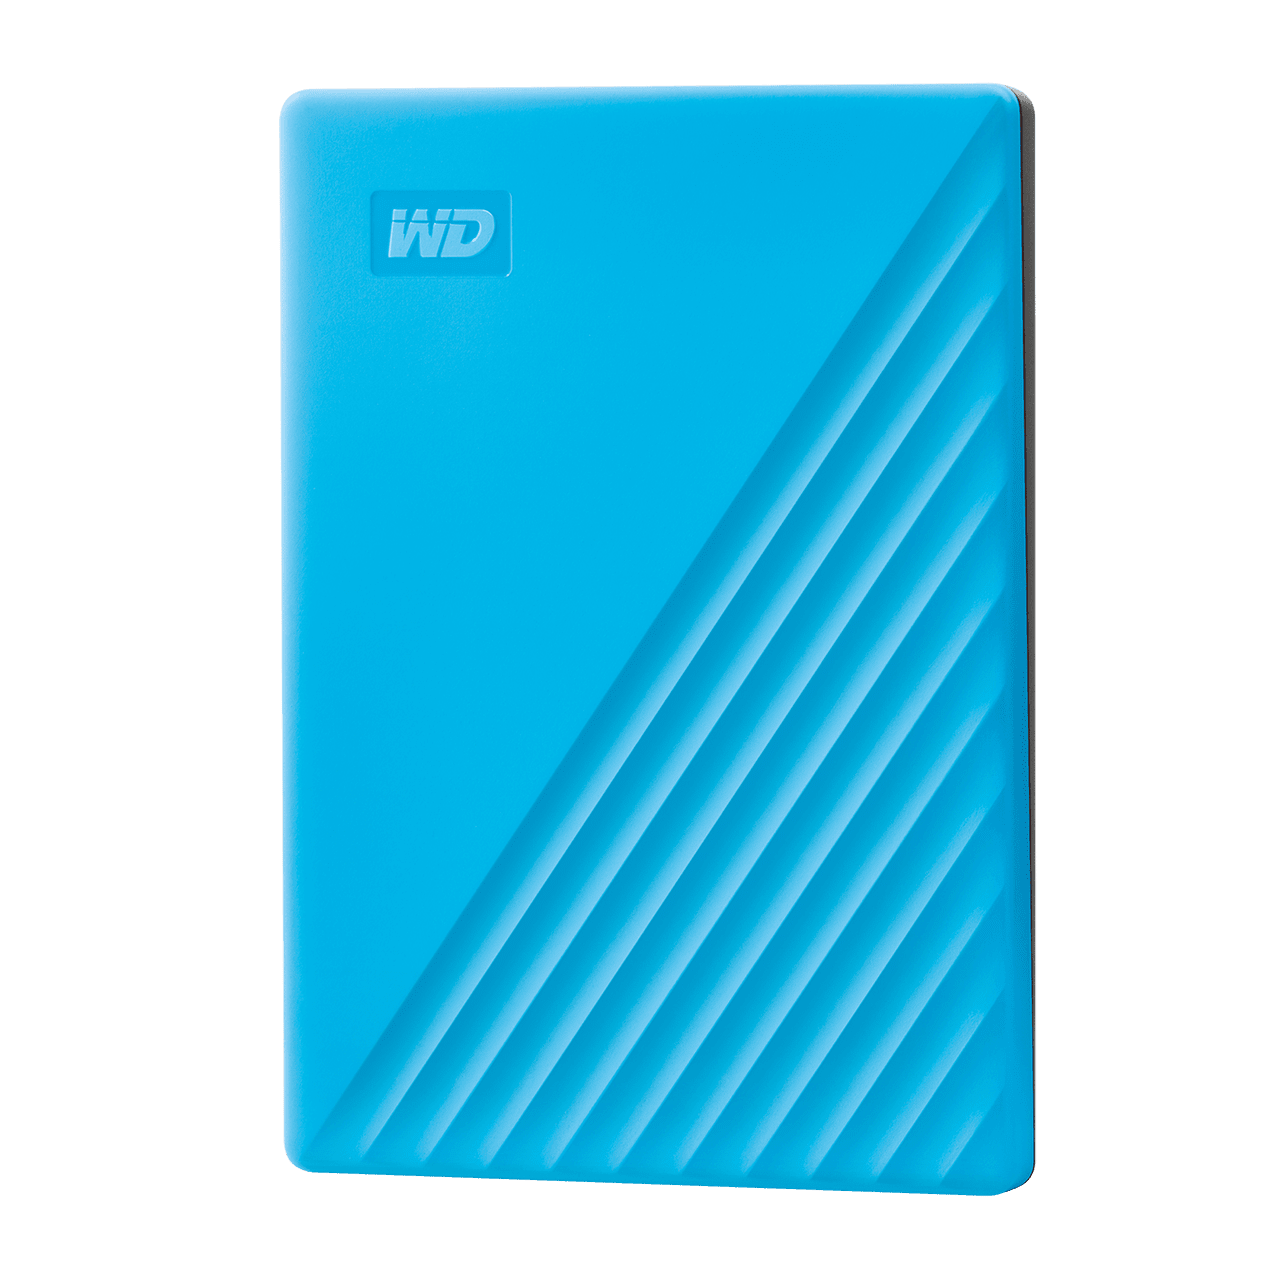 WD Western Digital My Passport 2TB ( BLUE ) Slim Portable External Hard Disk USB 3.0 With WD Backup Software & Password Protection